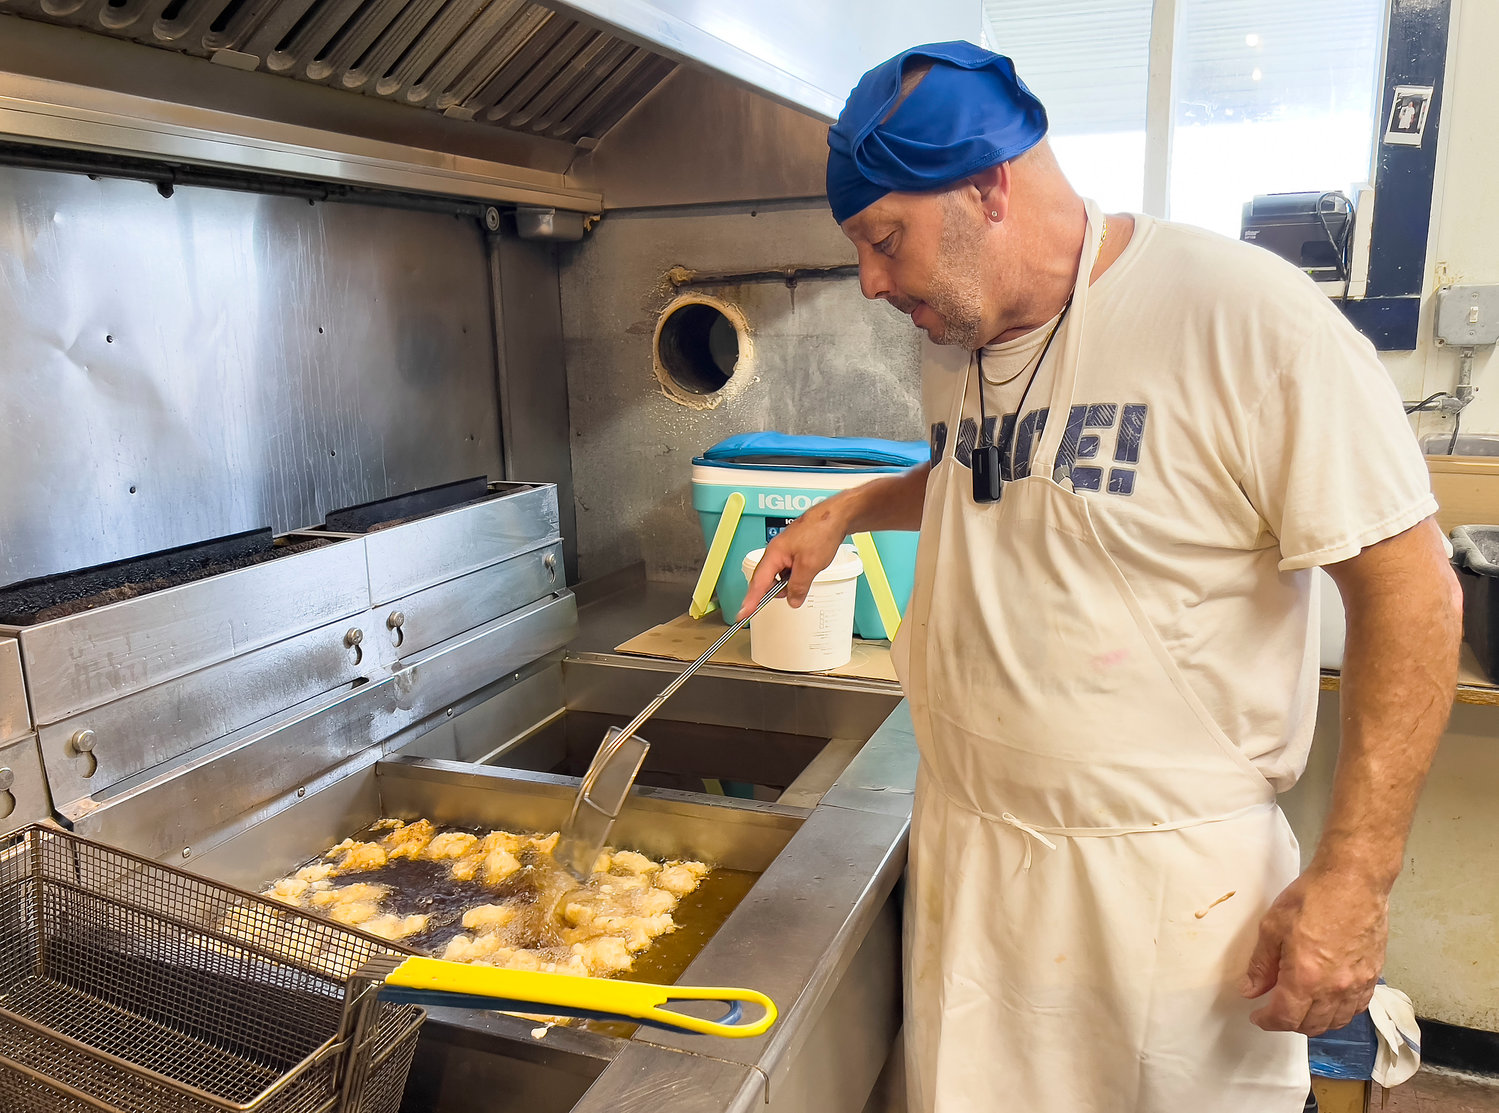 Robert Pires, the kitchen manager and head chef at Flo’s Drive-In on Park Avenue, prepares a batch of clamcakes inside the shack’s small kitchen, which often hits 110 degrees. “You don’t get a break here. We just have to keep on working through it,” he said.